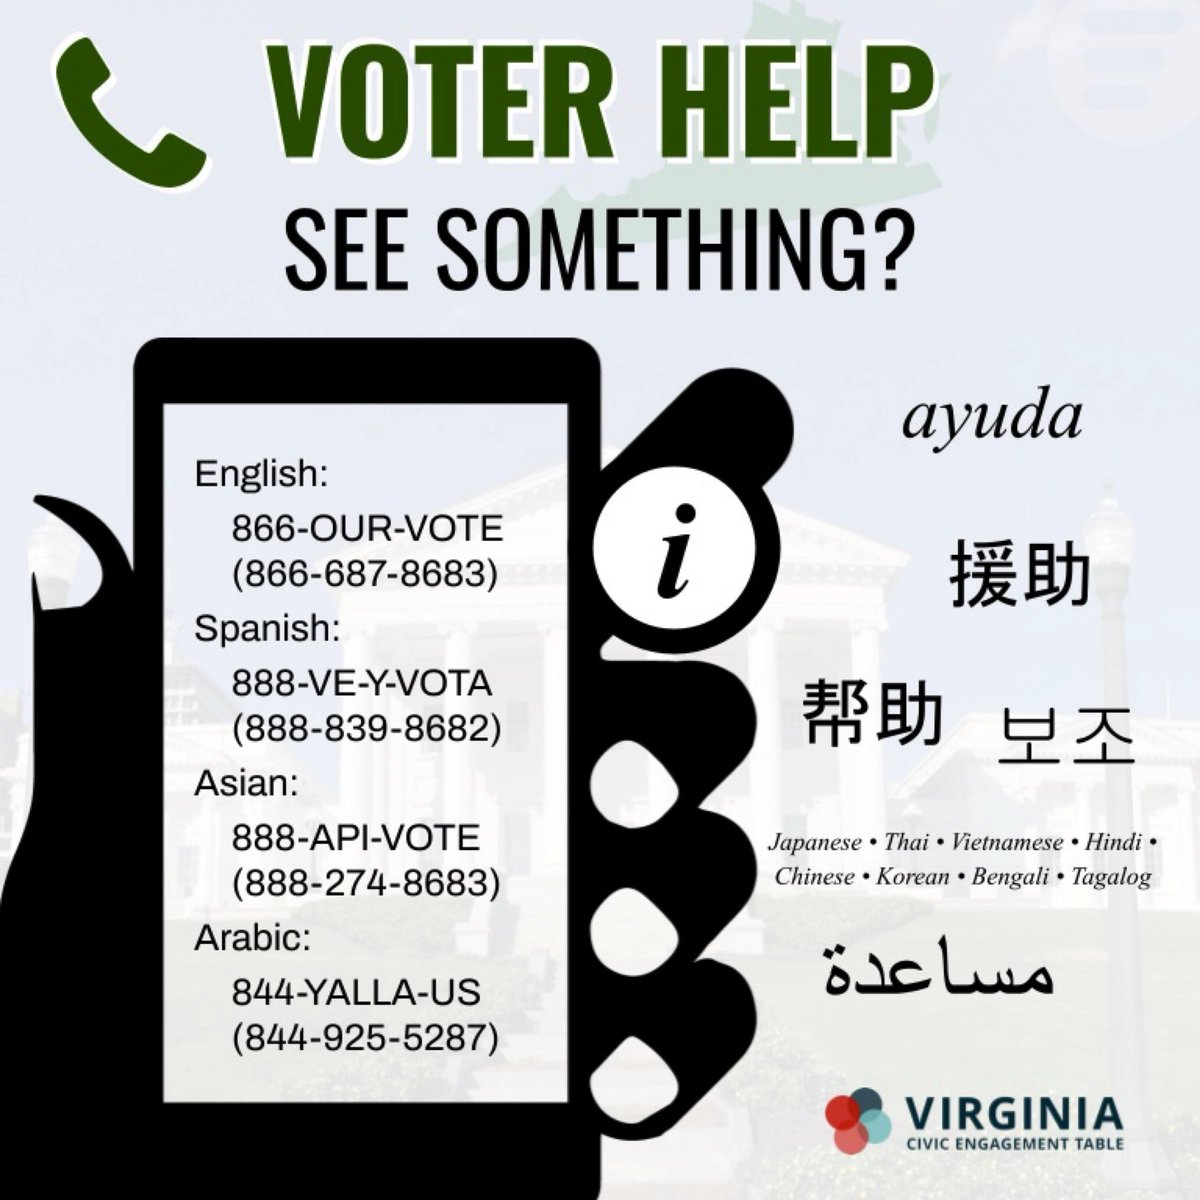 #Virginia - your vote matters! 

If you have questions OR need to report any issues at the polls in #Virginia or anywhere in the US, call 866-OUR VOTE  #ElectionProtection #BeAVoter #EngageVA #VAvotes